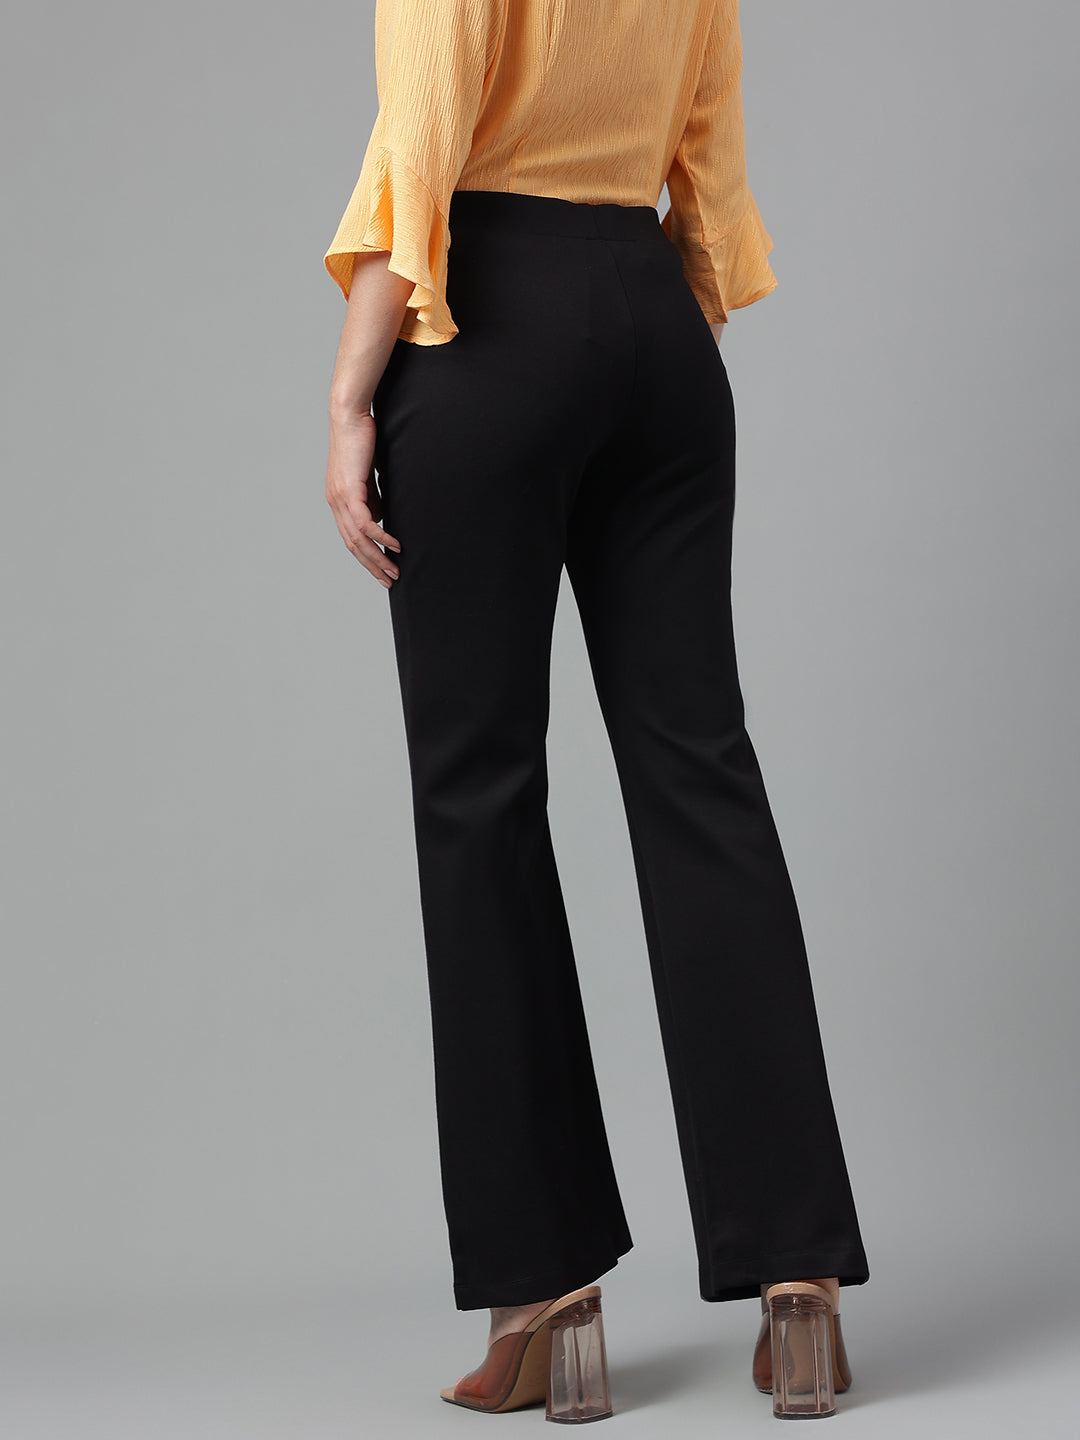 Black Straight Fit Trousers with Pockets For Casual Wear